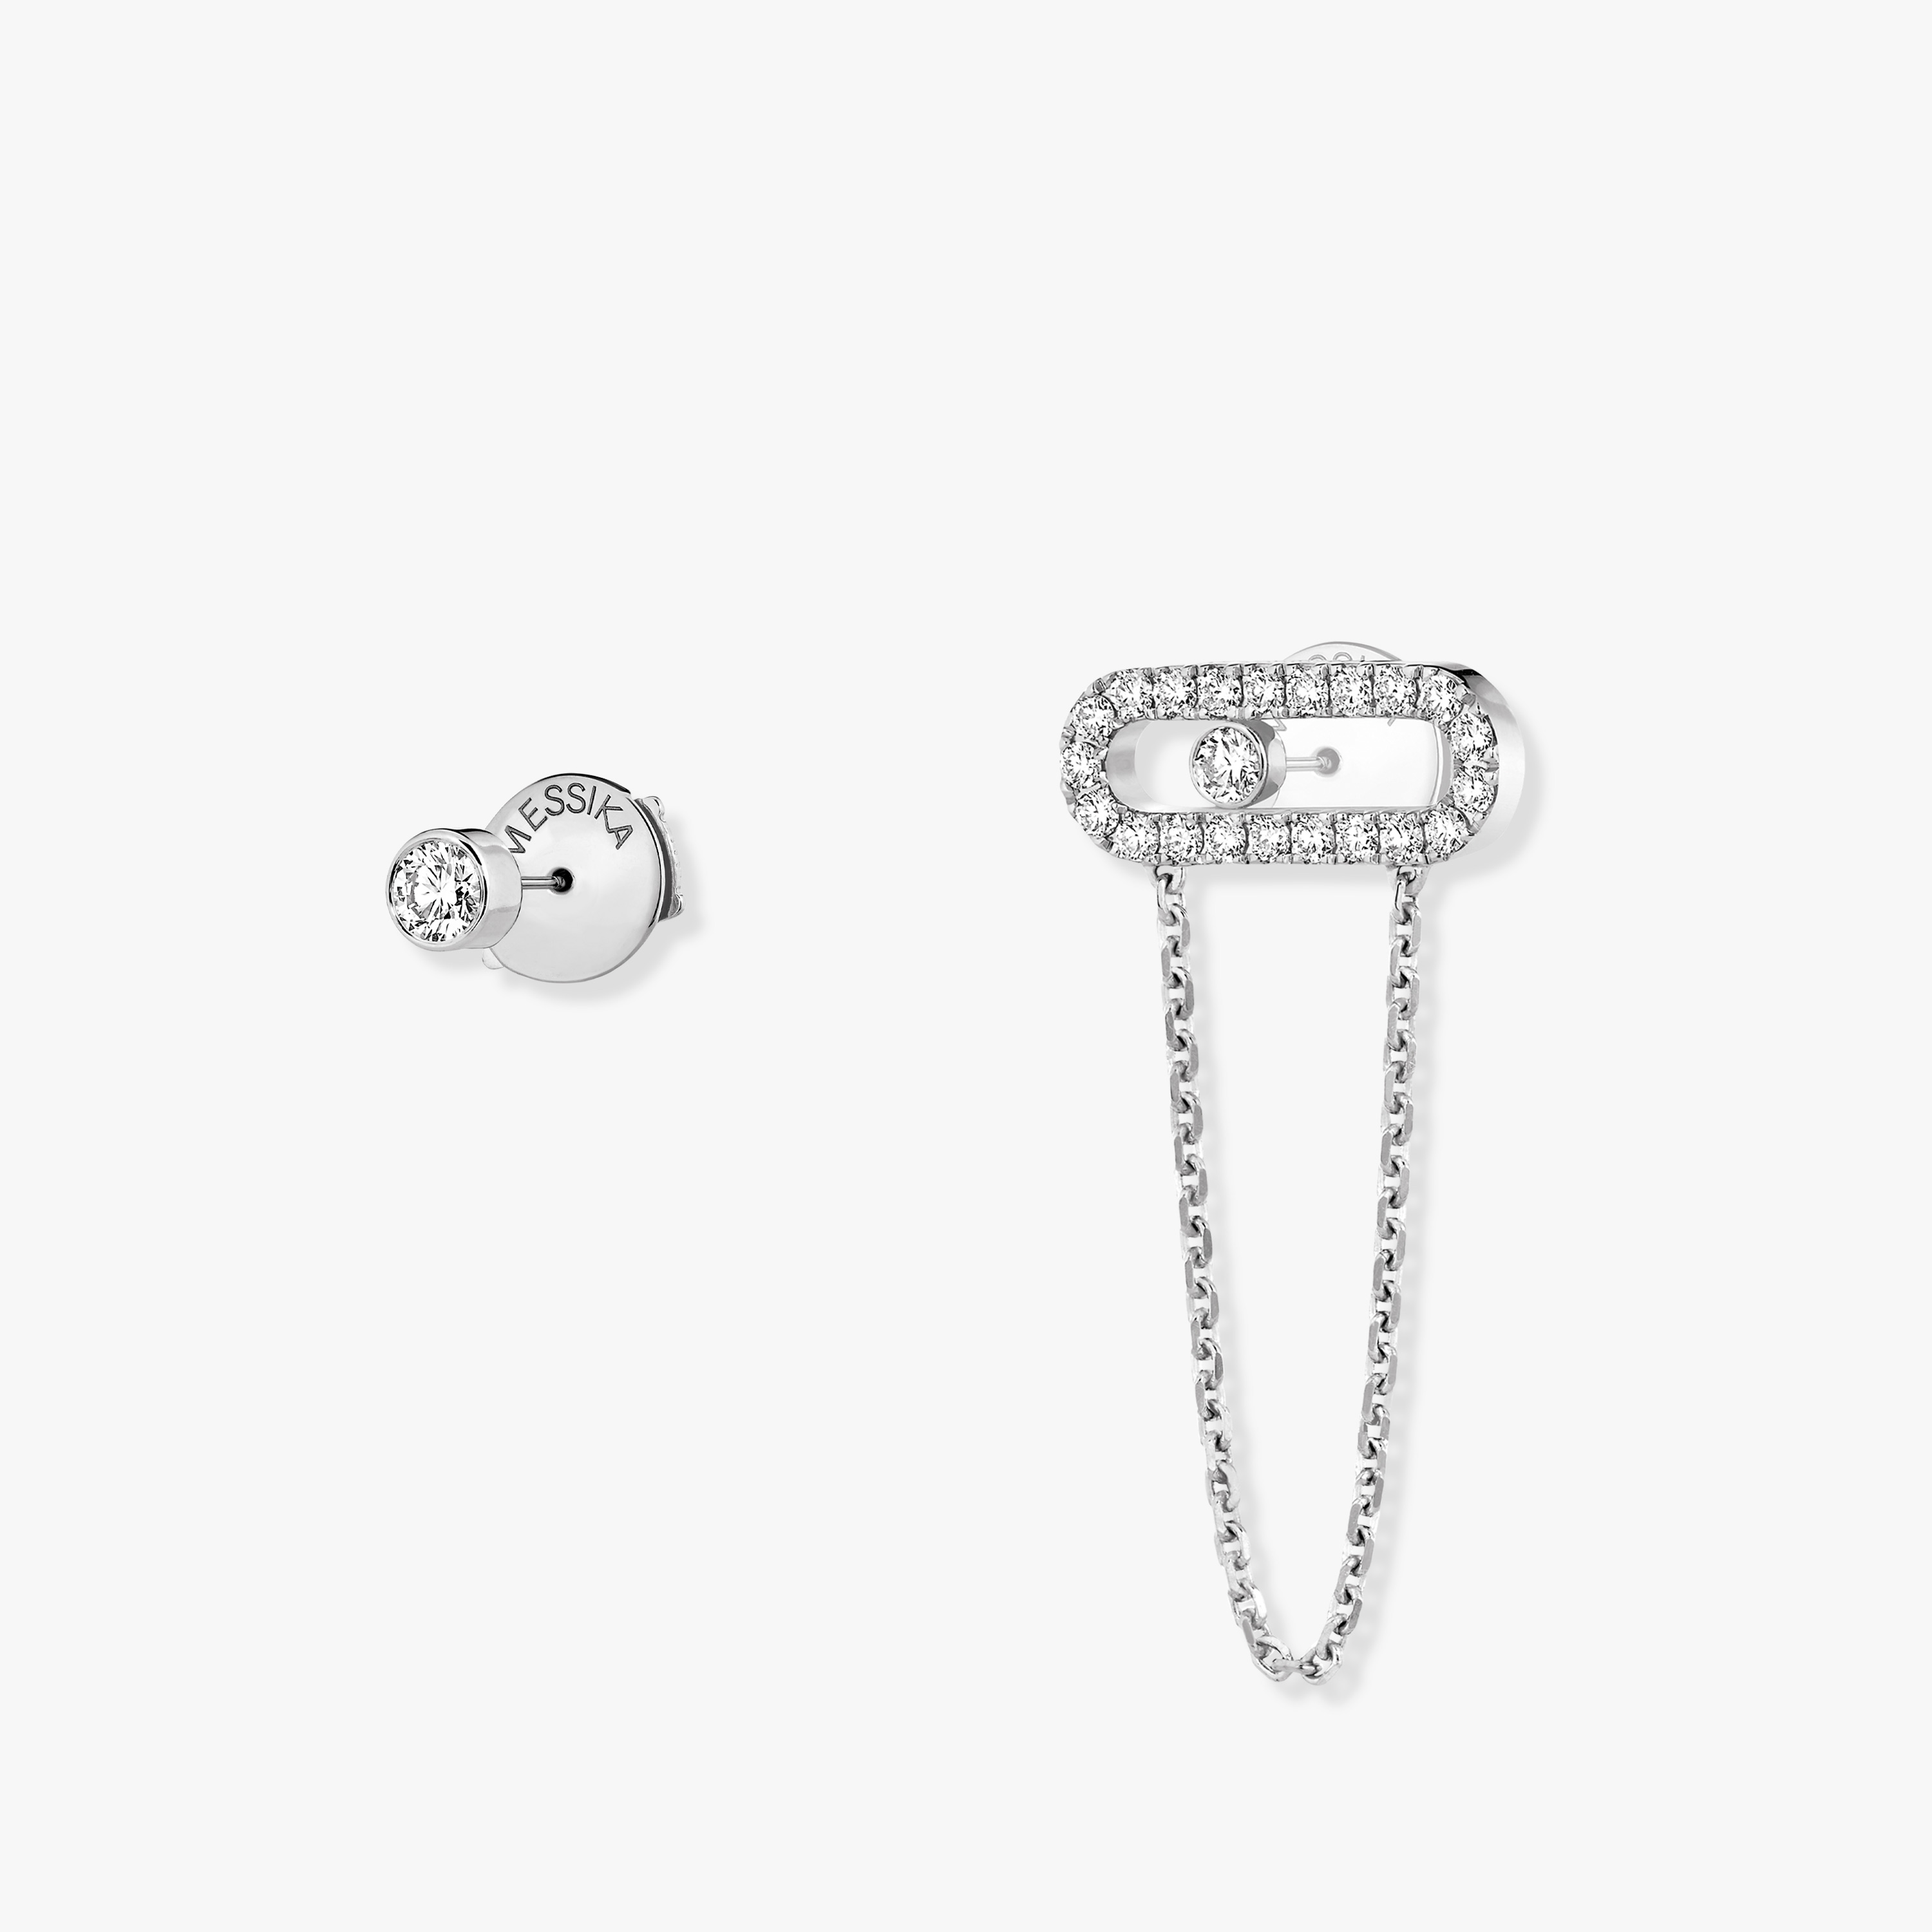 Earrings For Her White Gold Diamond Move Uno Chain and Stud earrings 12146-WG